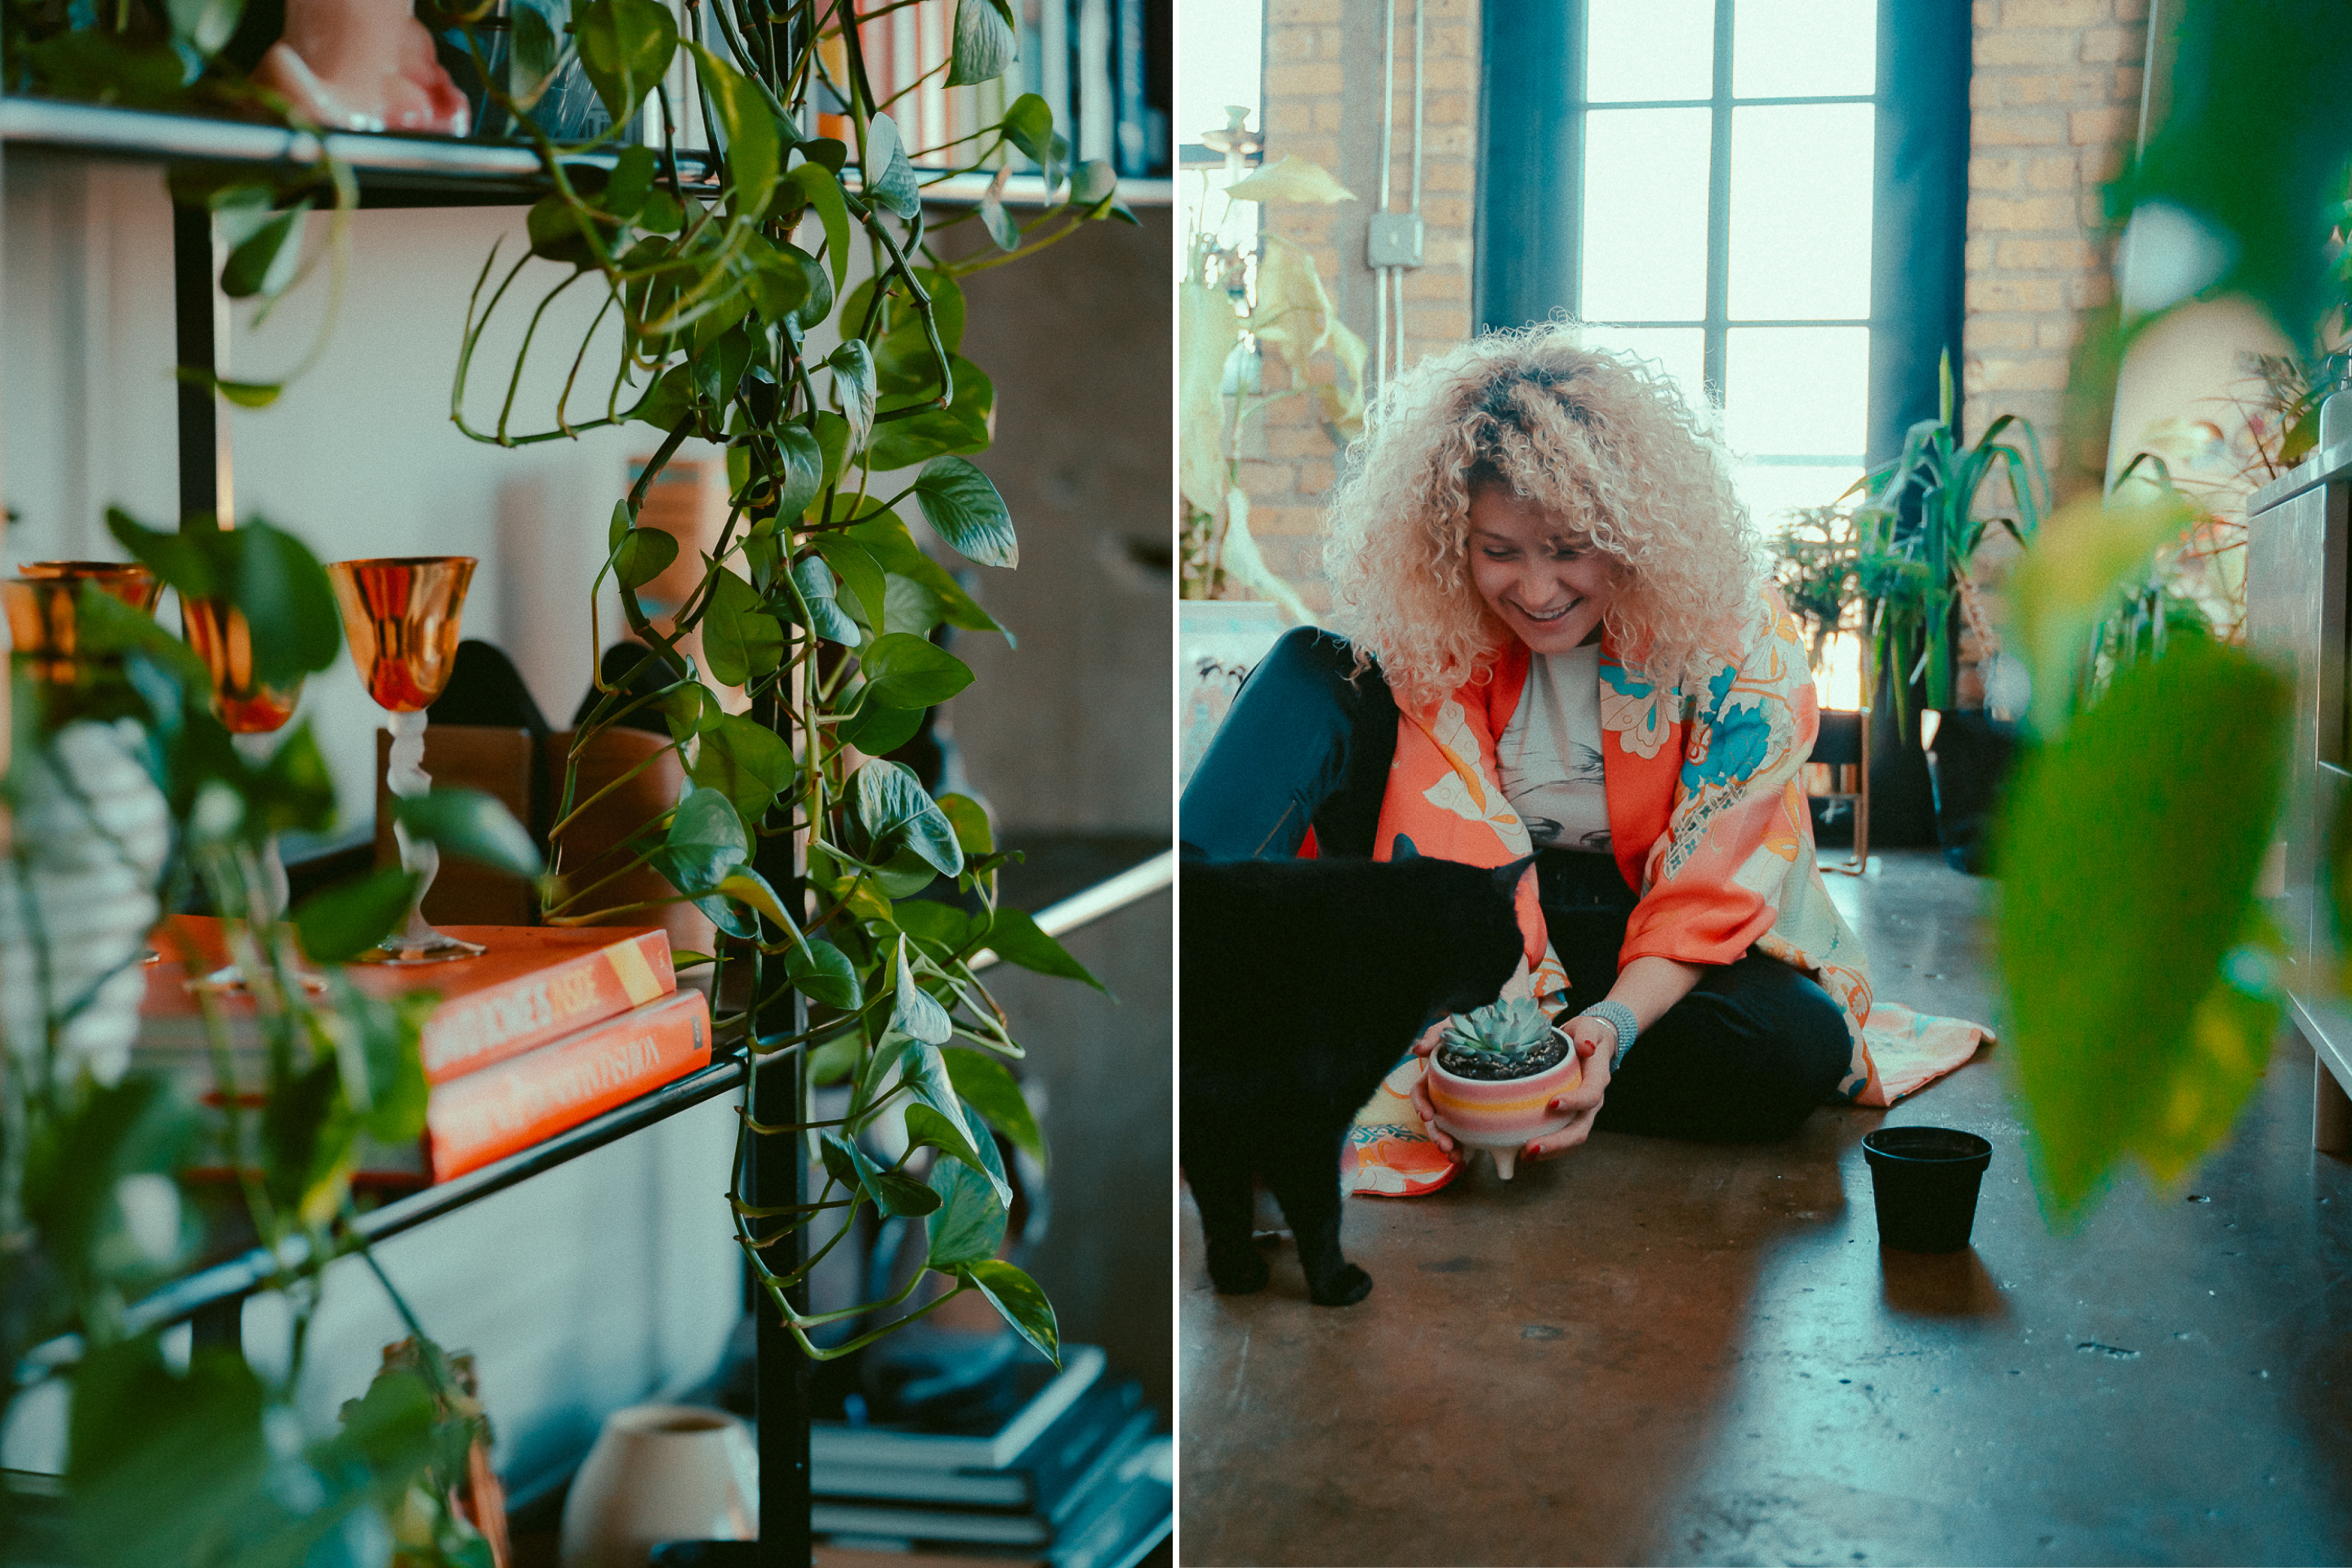 Millennials Aren't Buying Homes, but They Are Spending Thousands on Houseplants